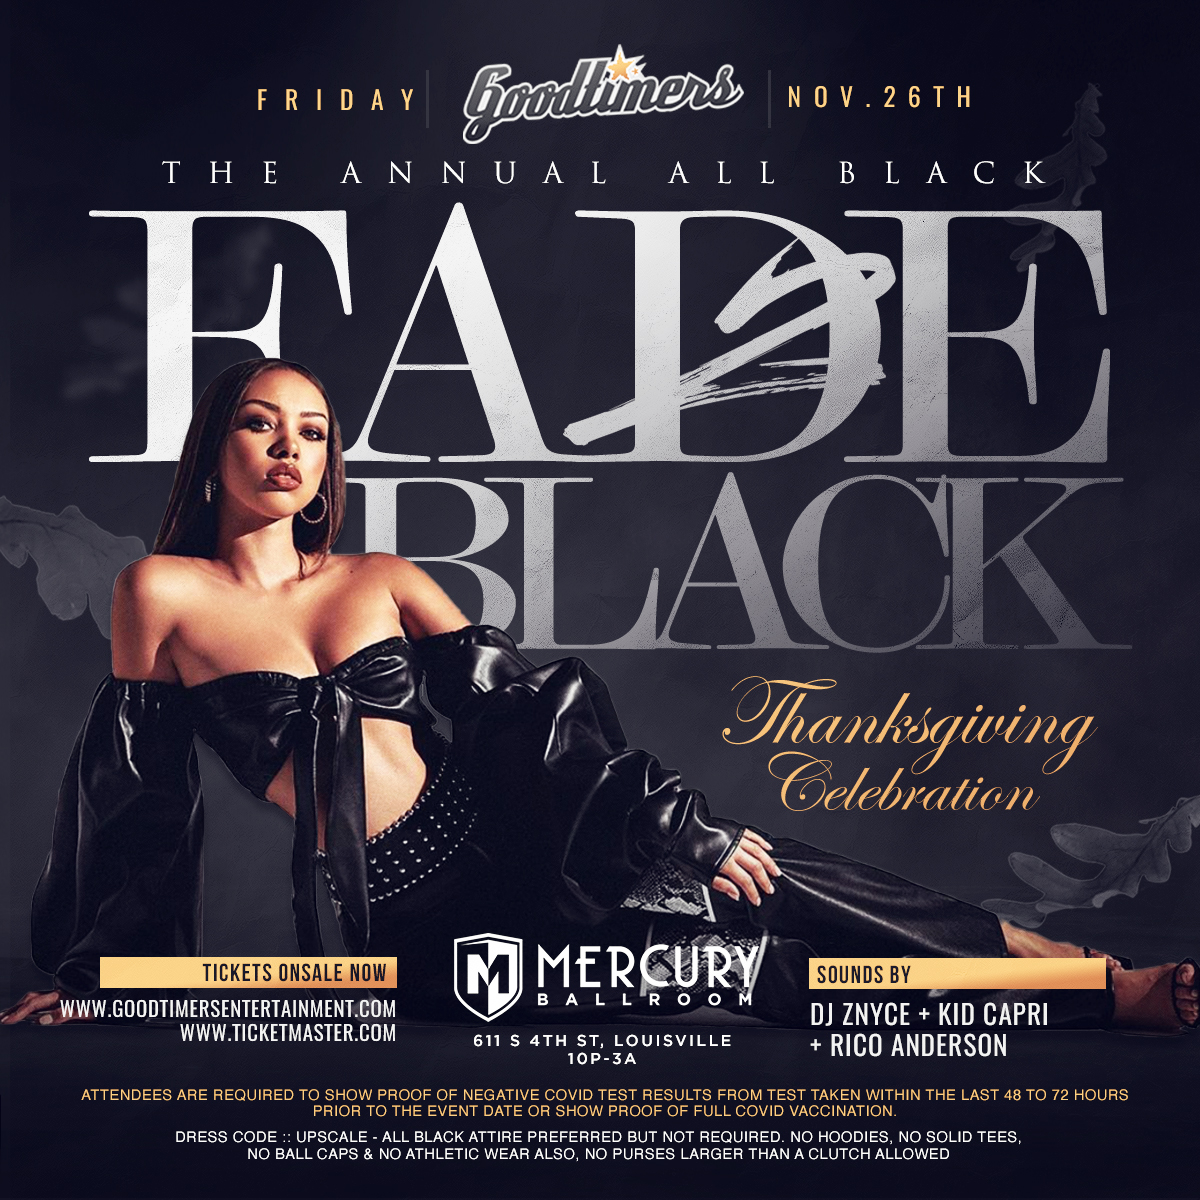 You are currently viewing Goodtimers Annual All Black Thanksgiving Celebration “Fade To Black”